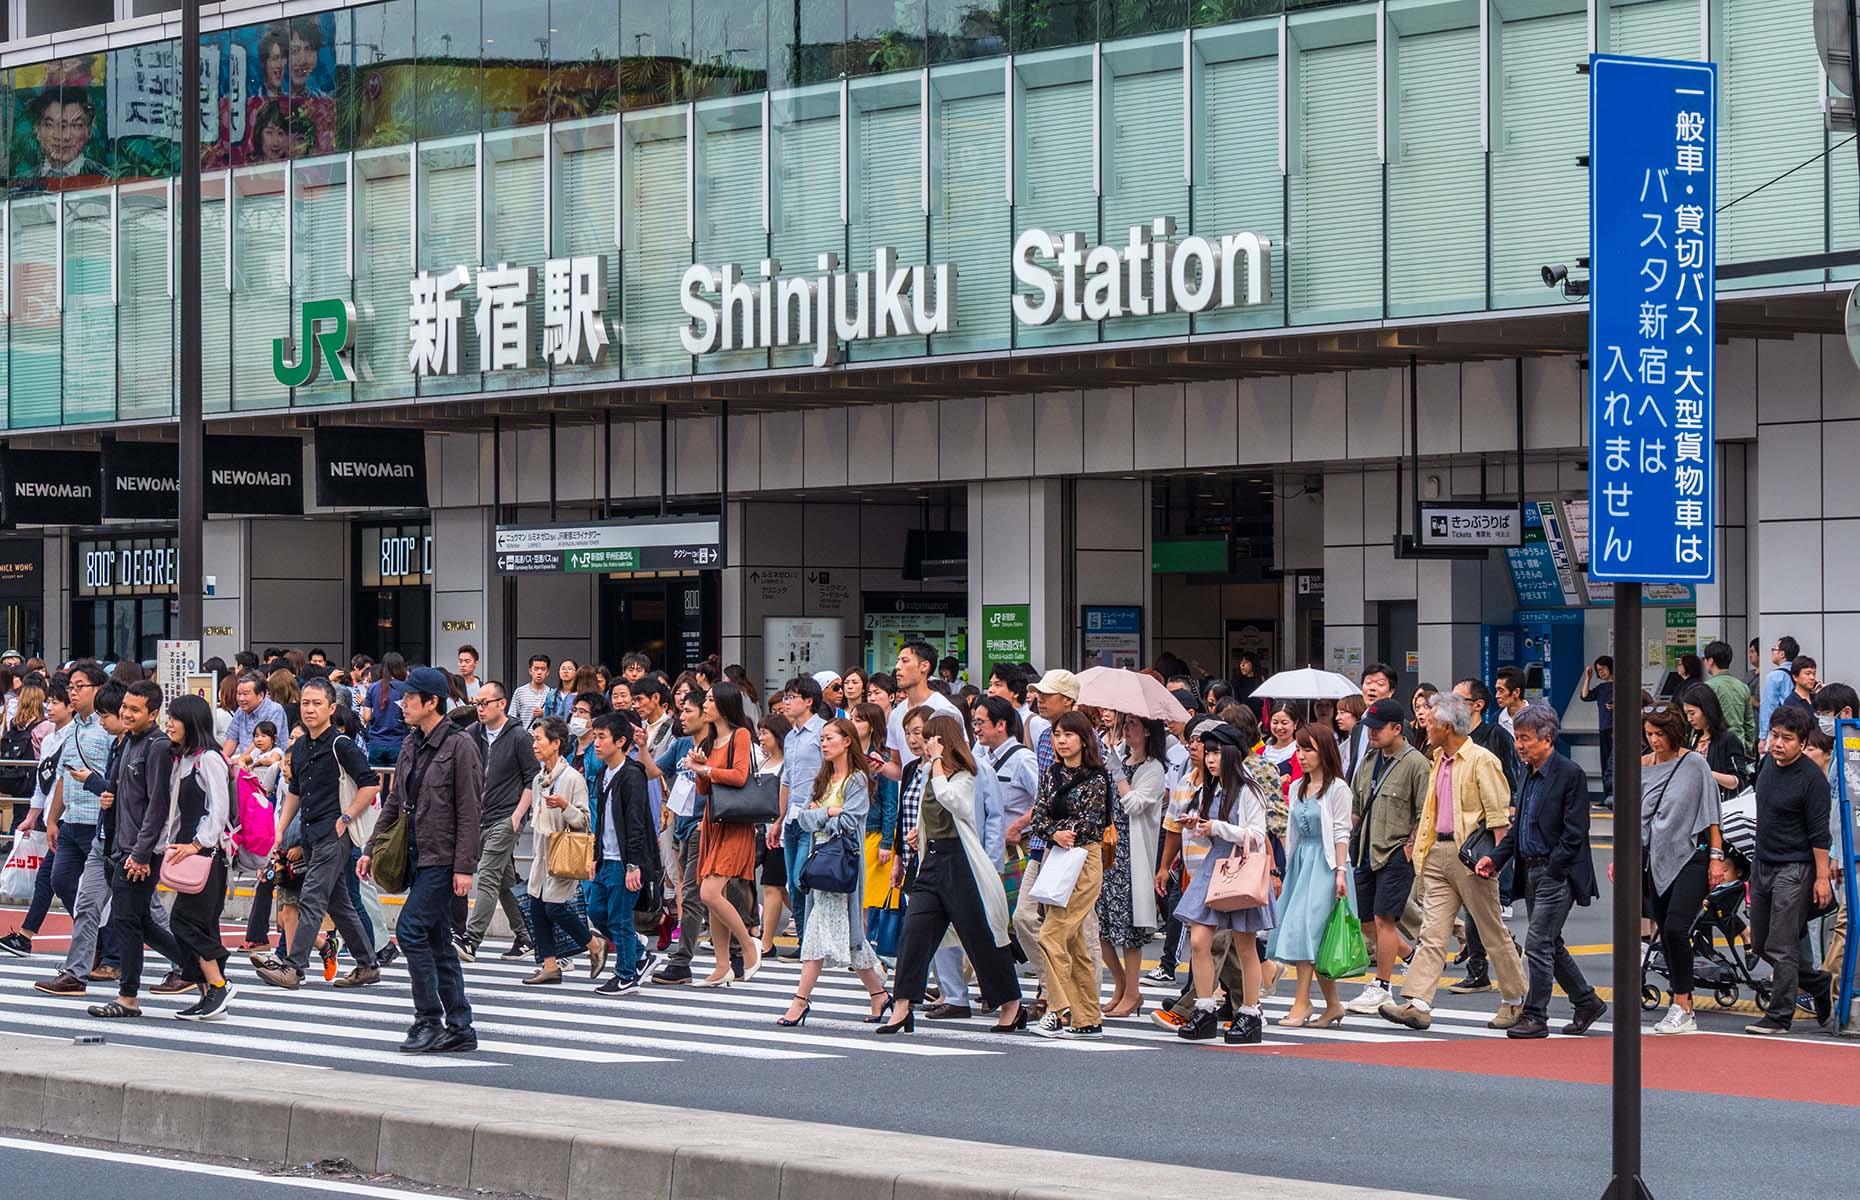 <p>Shinjuku Station in Tokyo, Japan is the busiest train station in the world with over <a href="https://www.shinjukustation.com/shinjuku-station-map-finding-your-way/">3.6 million passengers</a> passing through daily (before the COVID-19 pandemic). The station has more than 200 exits and is made up of five smaller stations. <a href="https://www.railway-technology.com/features/europes-busiest-railway-stations/">Europe's busiest is Gare du Nord</a> in Paris, France, serving around 214 million passengers every year while <a href="https://www.railway-technology.com/features/featureworlds-busiest-train-stations/">Penn Station in New York City is the busiest in North America</a>, with a thousand passengers alighting and departing every 90 seconds.</p>  <p><a href="https://www.loveexploring.com/galleries/82456/stunning-pictures-of-the-worlds-most-beautiful-train-stations?page=1"><strong>Check out these beautiful images of the world's train stations</strong></a></p>